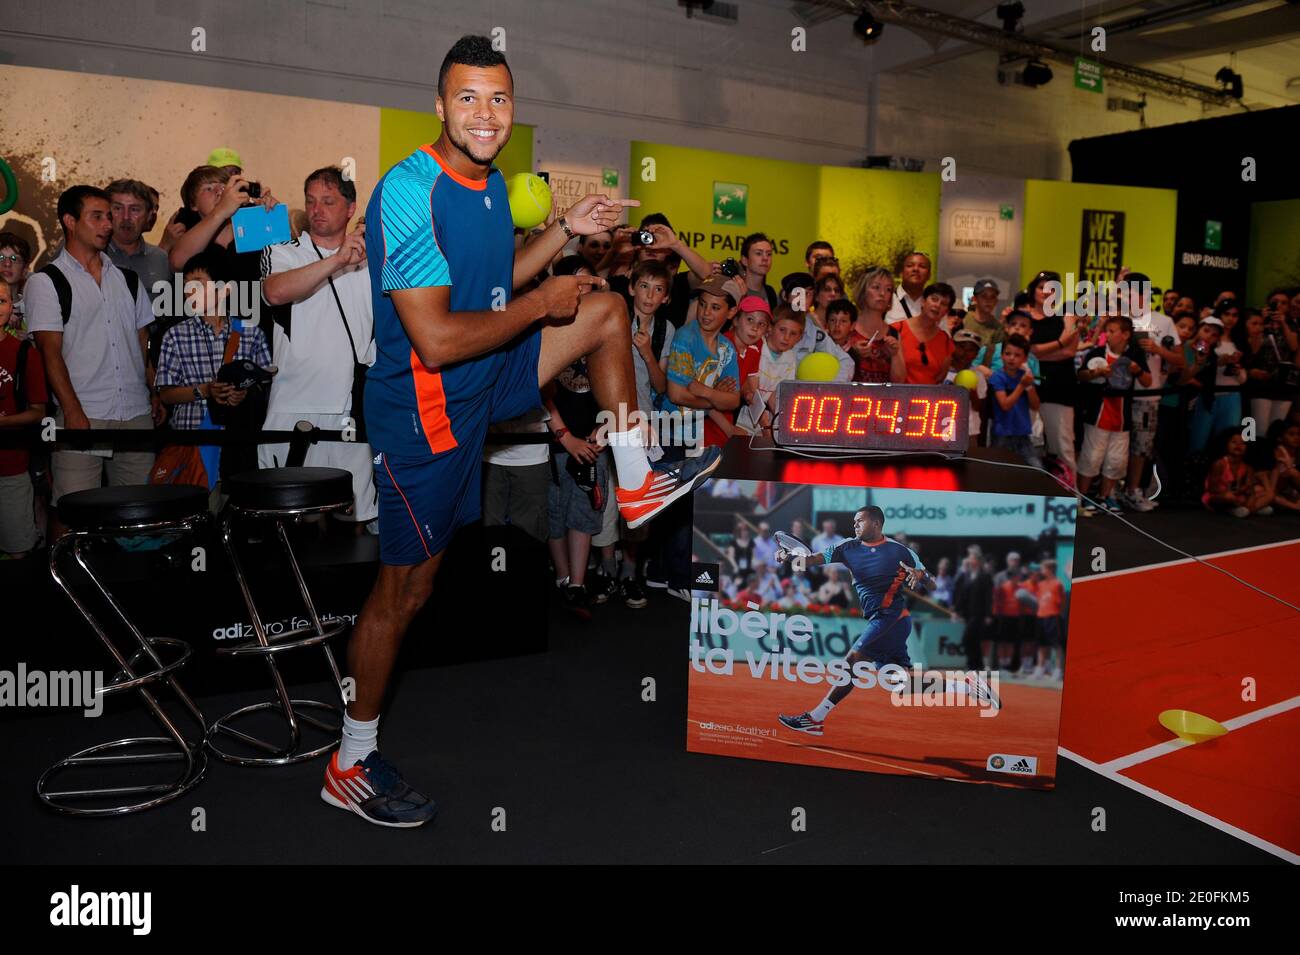 France's Jo-Wilfried Tsonga during a Adidas event at the Rland Garros arena  in Paris, France on May 26, 2012. Photo by Corinne Dubreuil/ABACAPRESS.COM  Stock Photo - Alamy